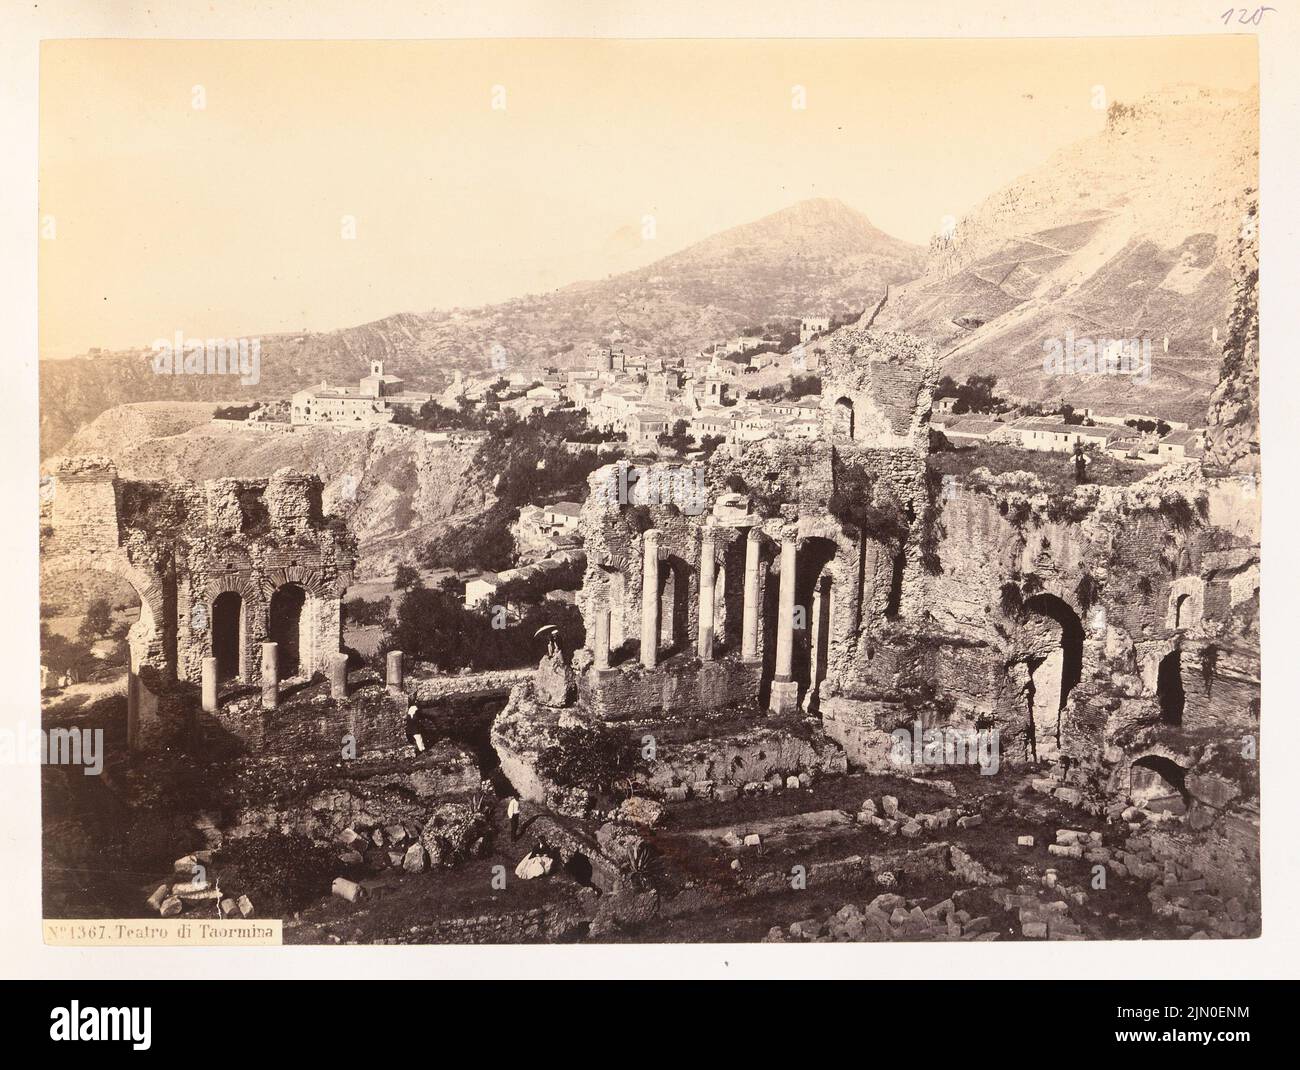 Unknown photographer, Roman theater in Taormina (without dat.): View of the stage house. Photo on cardboard, 19.5 x 25.8 cm (including scan edges) unbek. Fotograf : Römisches Theater, Taormina Stock Photo